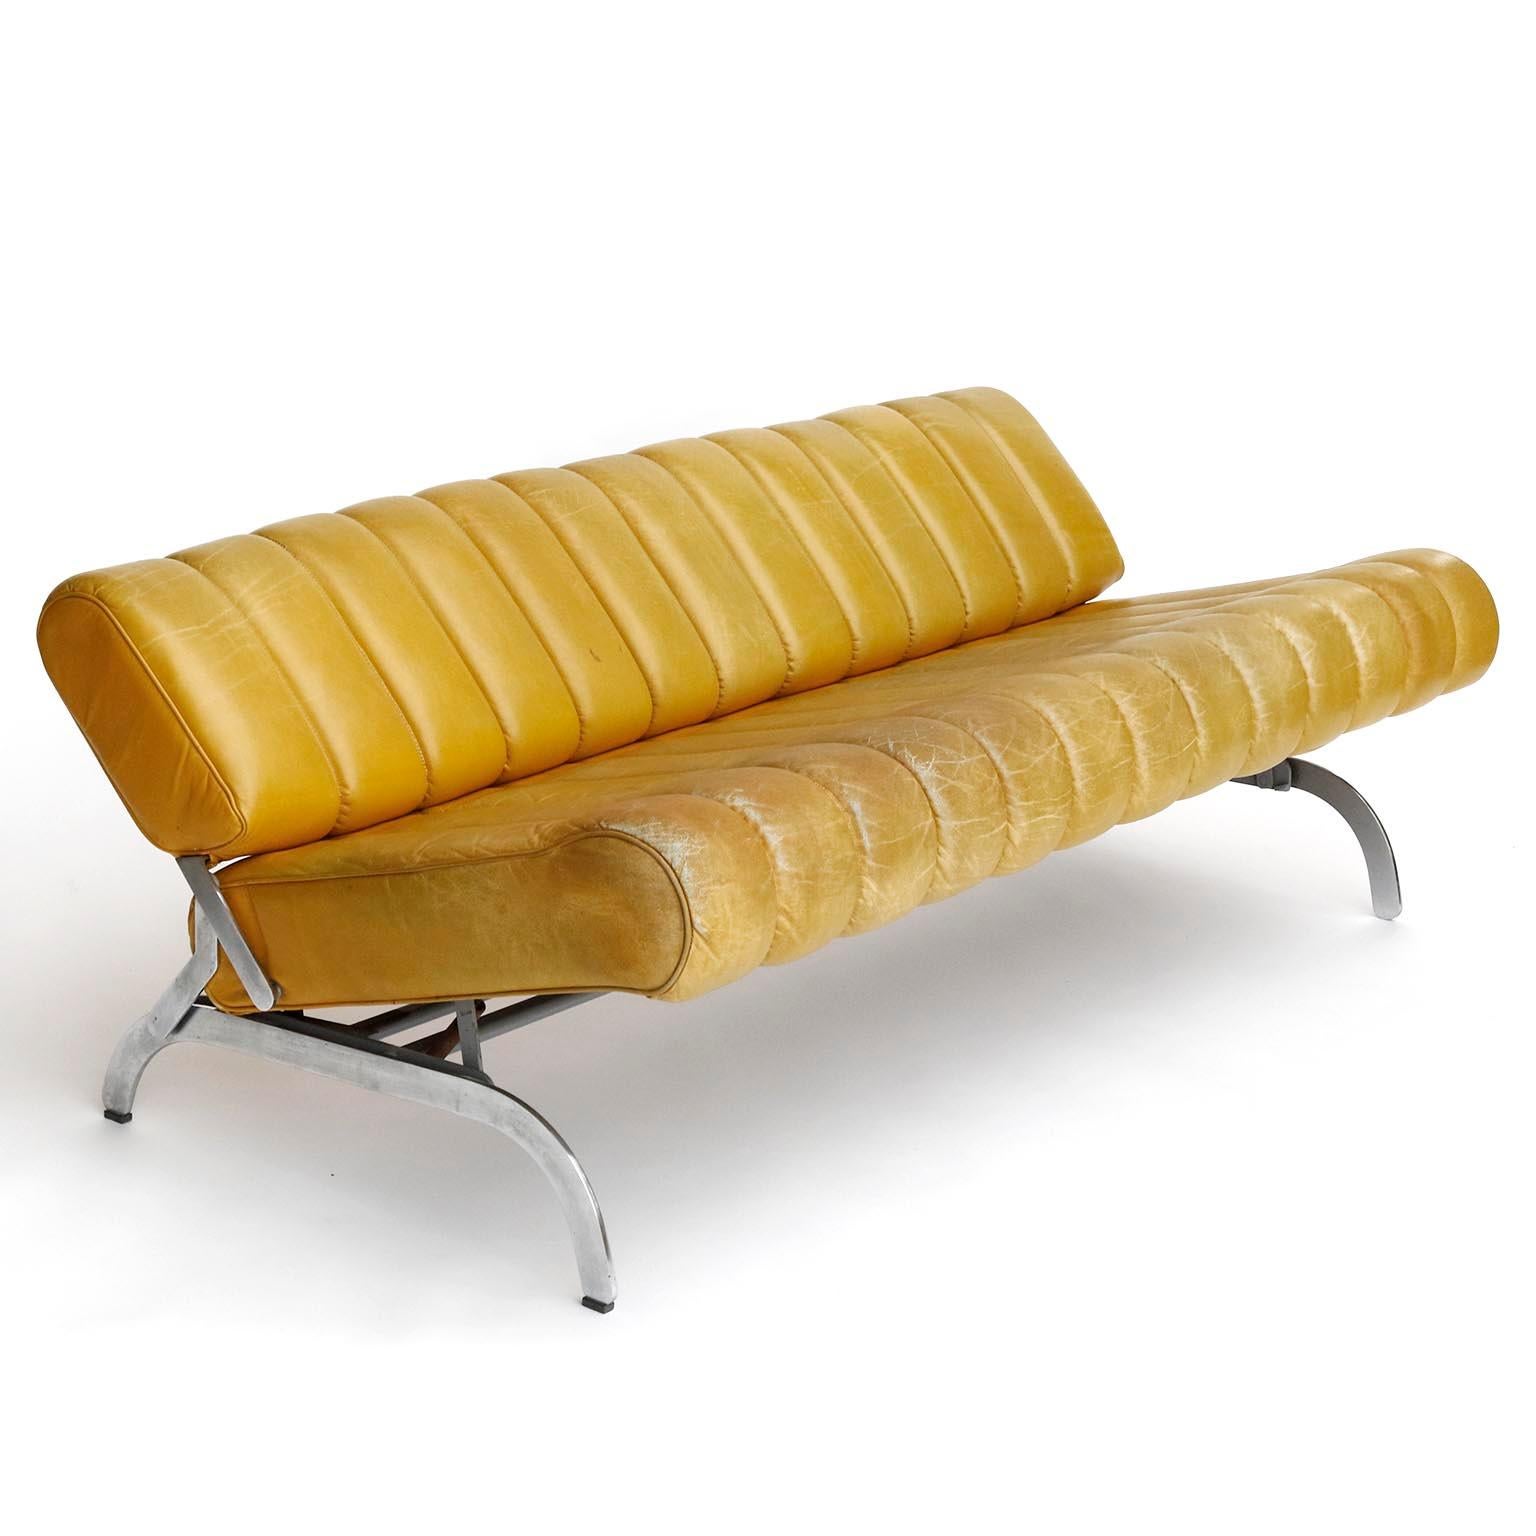 Metal Karl Wittmann Sofa Daybed Independence, Patinated Yellow Leather, Austria, 1970s